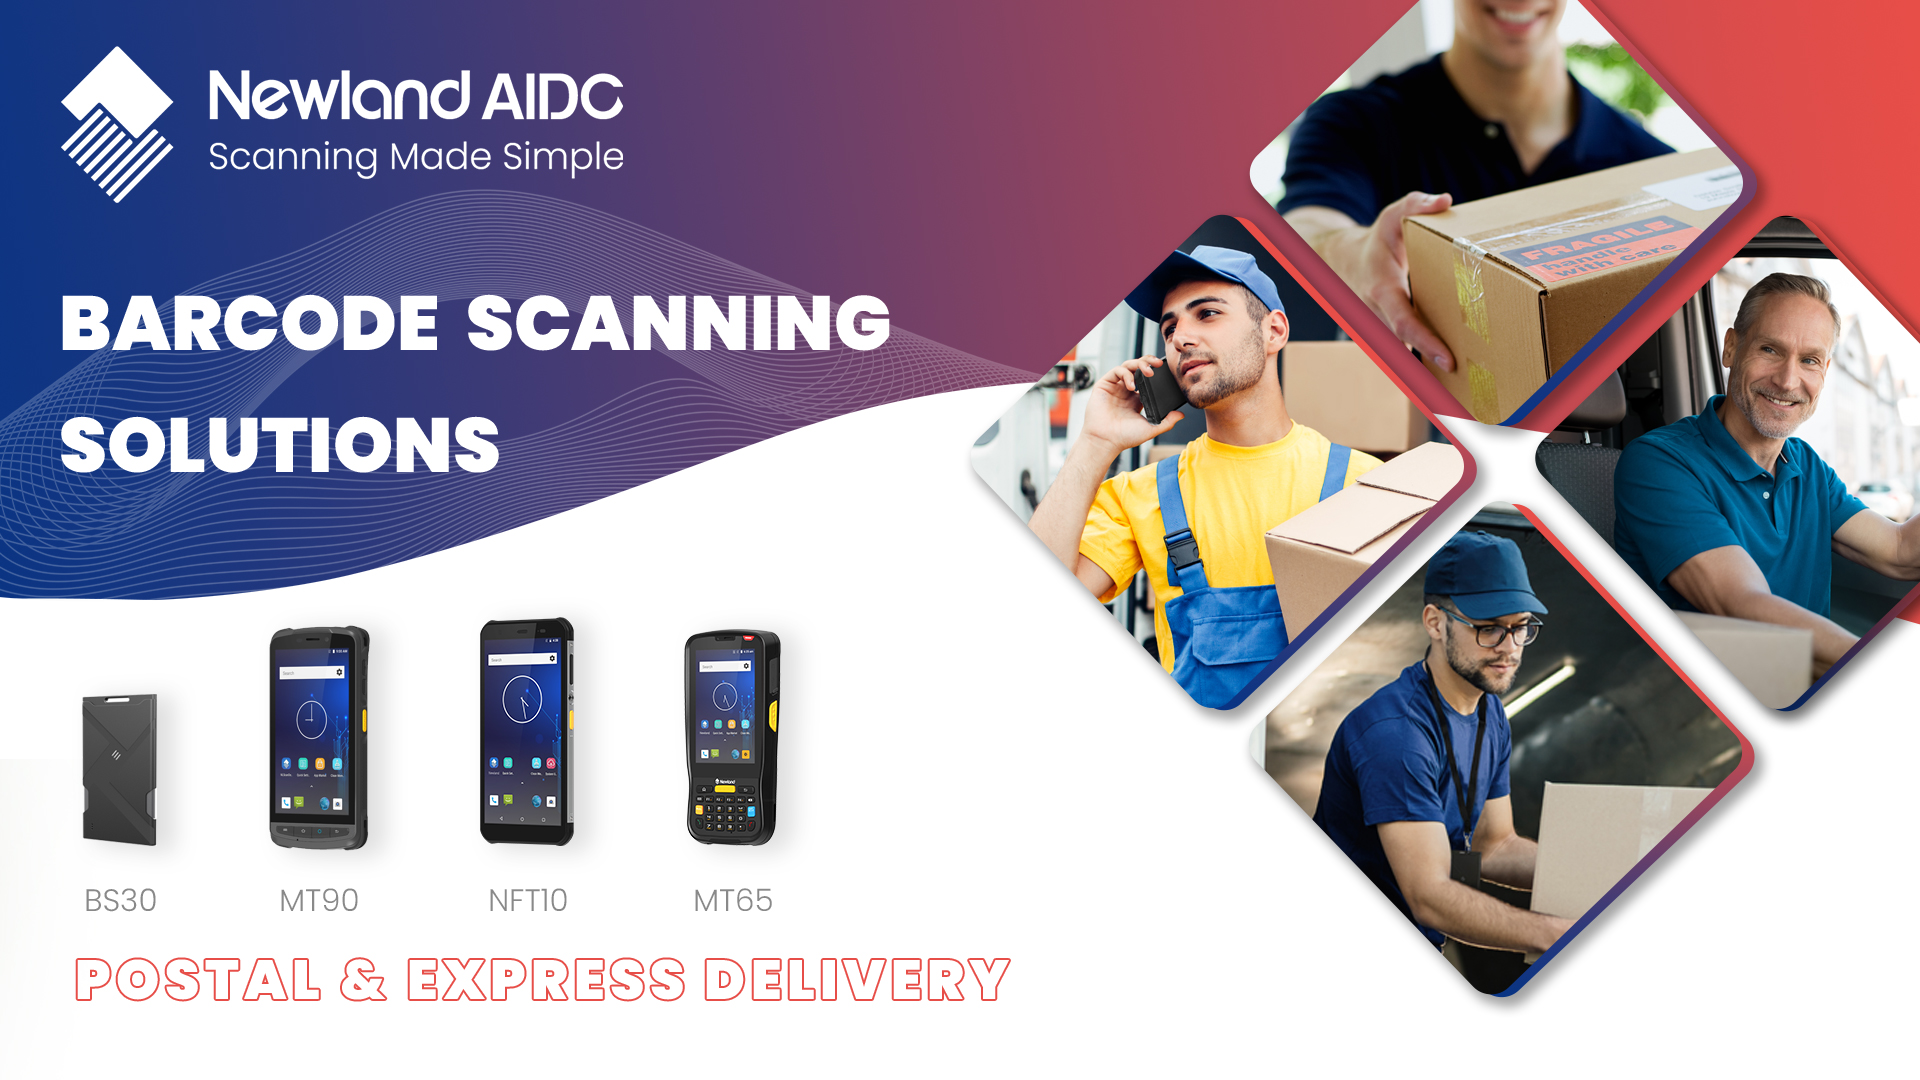 Newland AIDC Transport & Express Delivery Solution